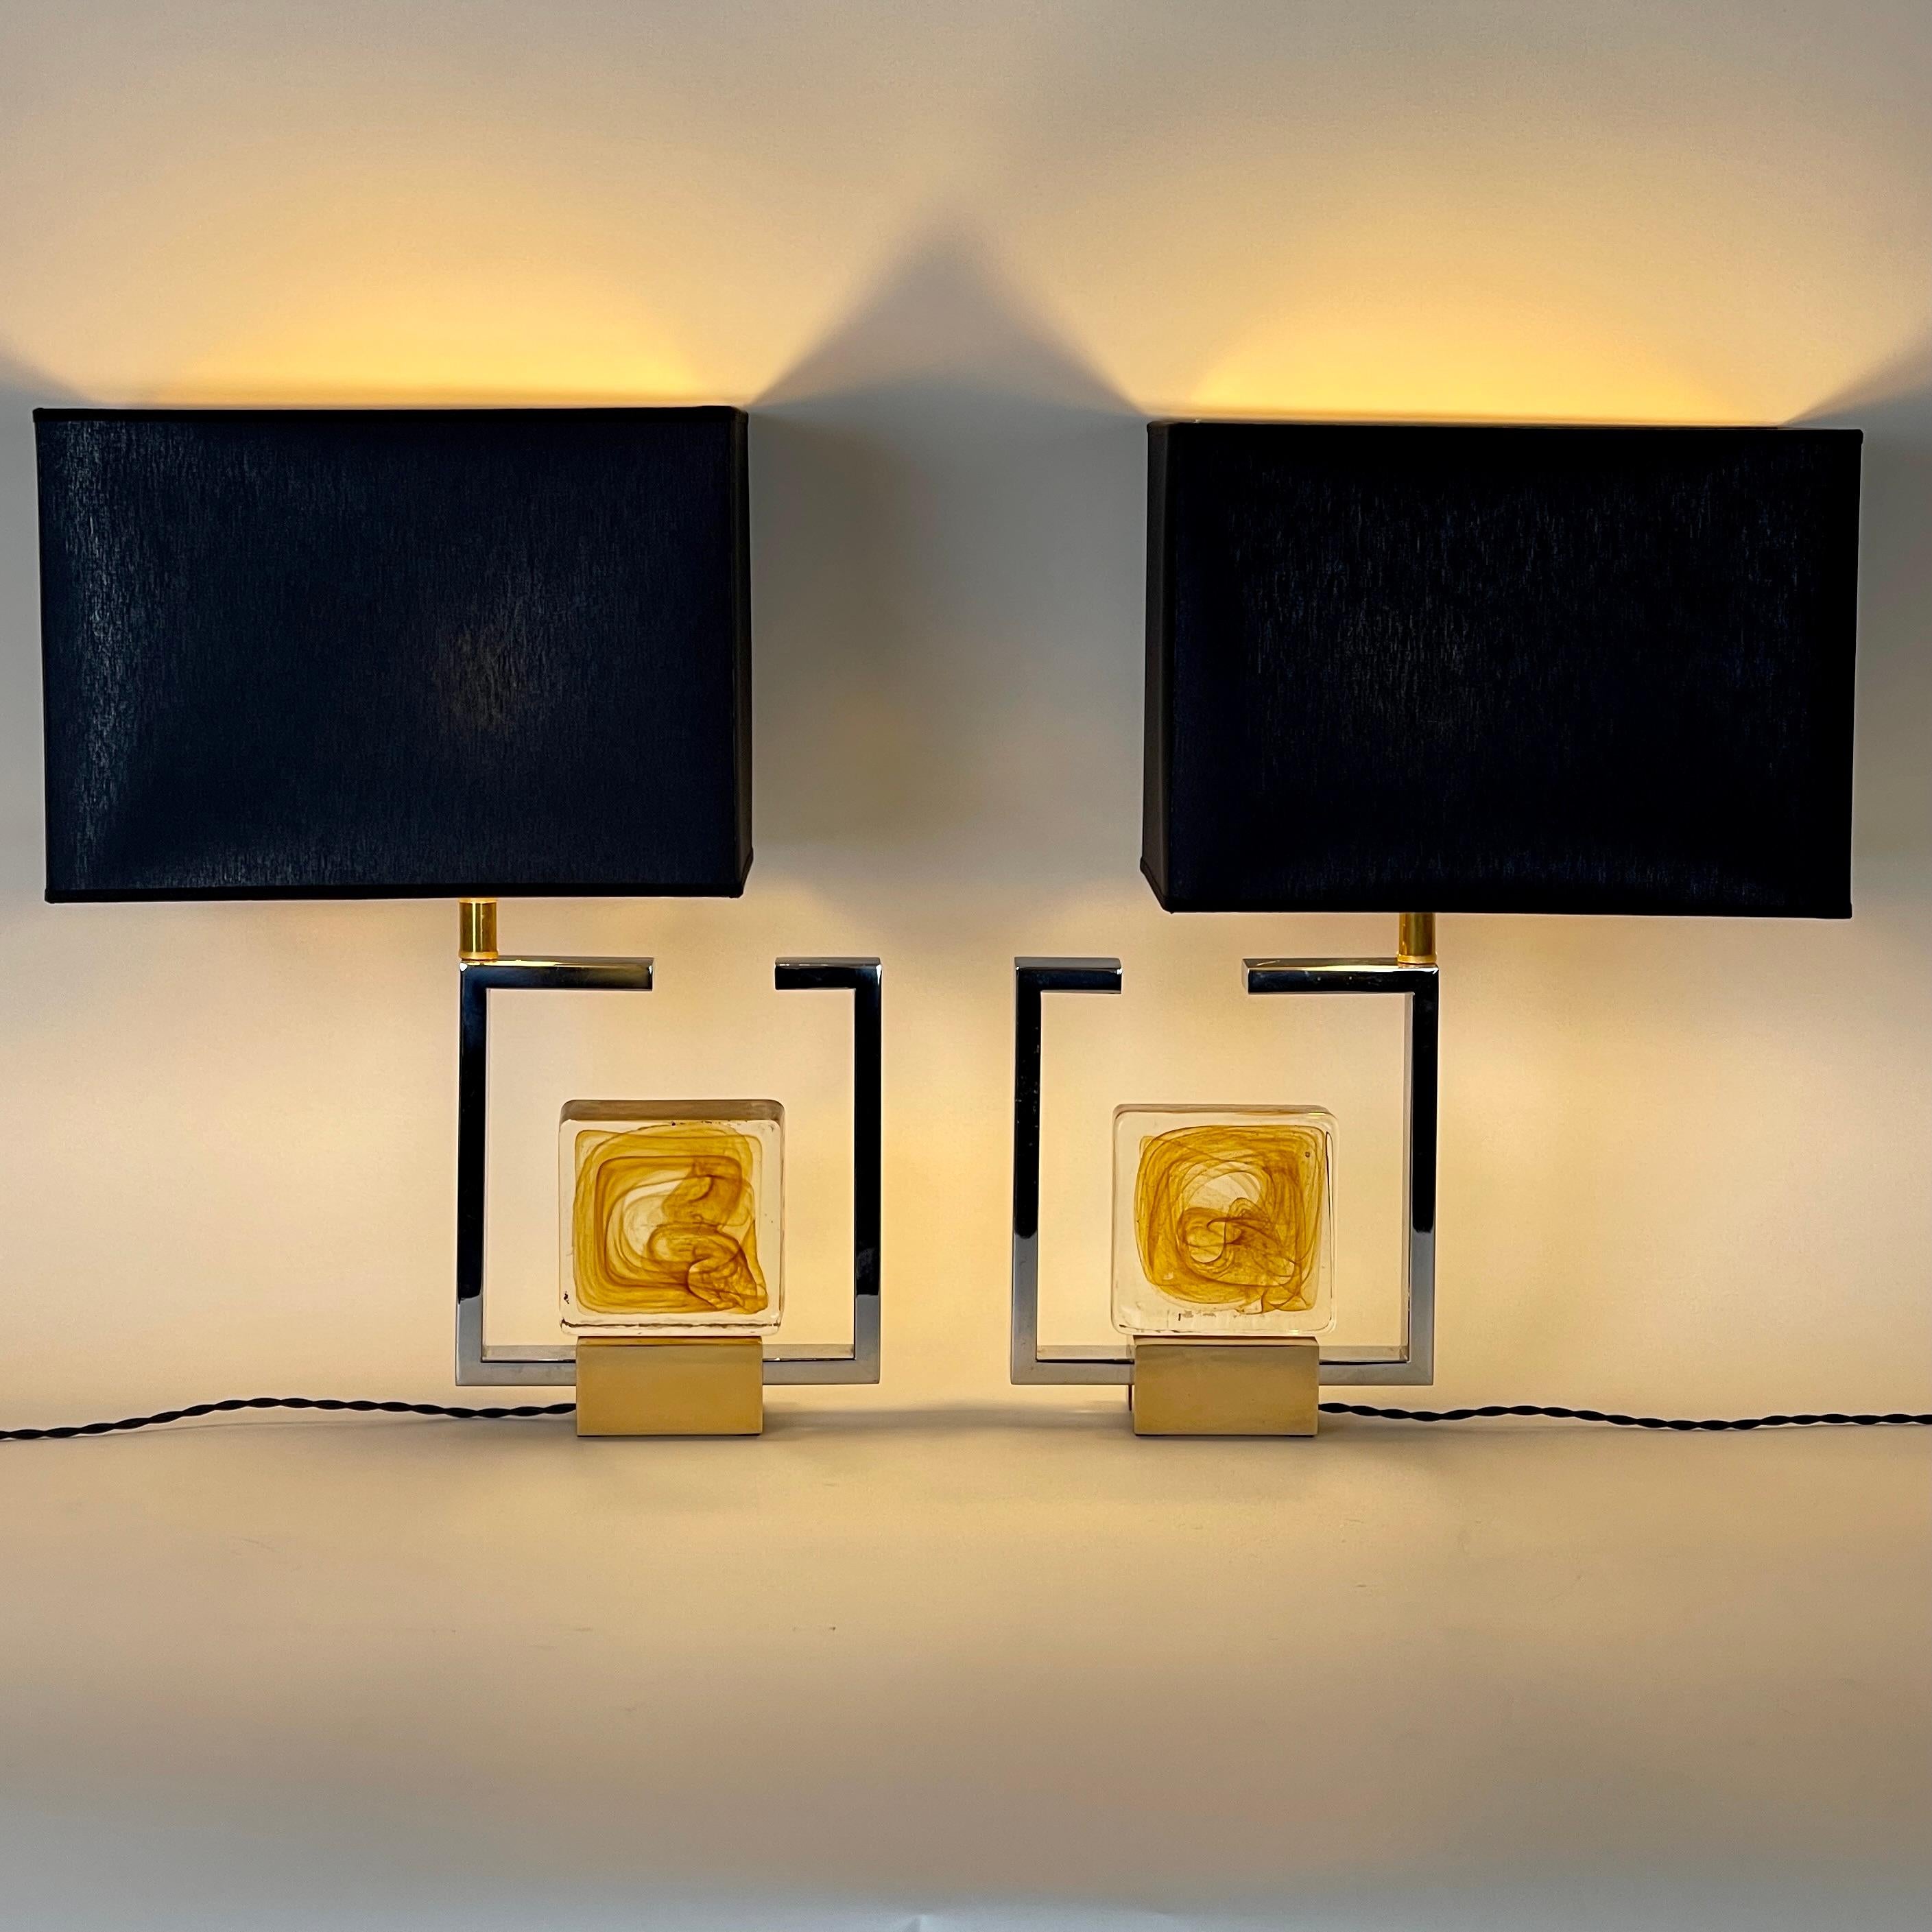 Solid block of transparent & yellow Murano art glass.
Black cotton shades included, size: 35 x 25 x 25 H cm.
Total lamp height with the shade: 55 cm.
One E27 light bulb each.